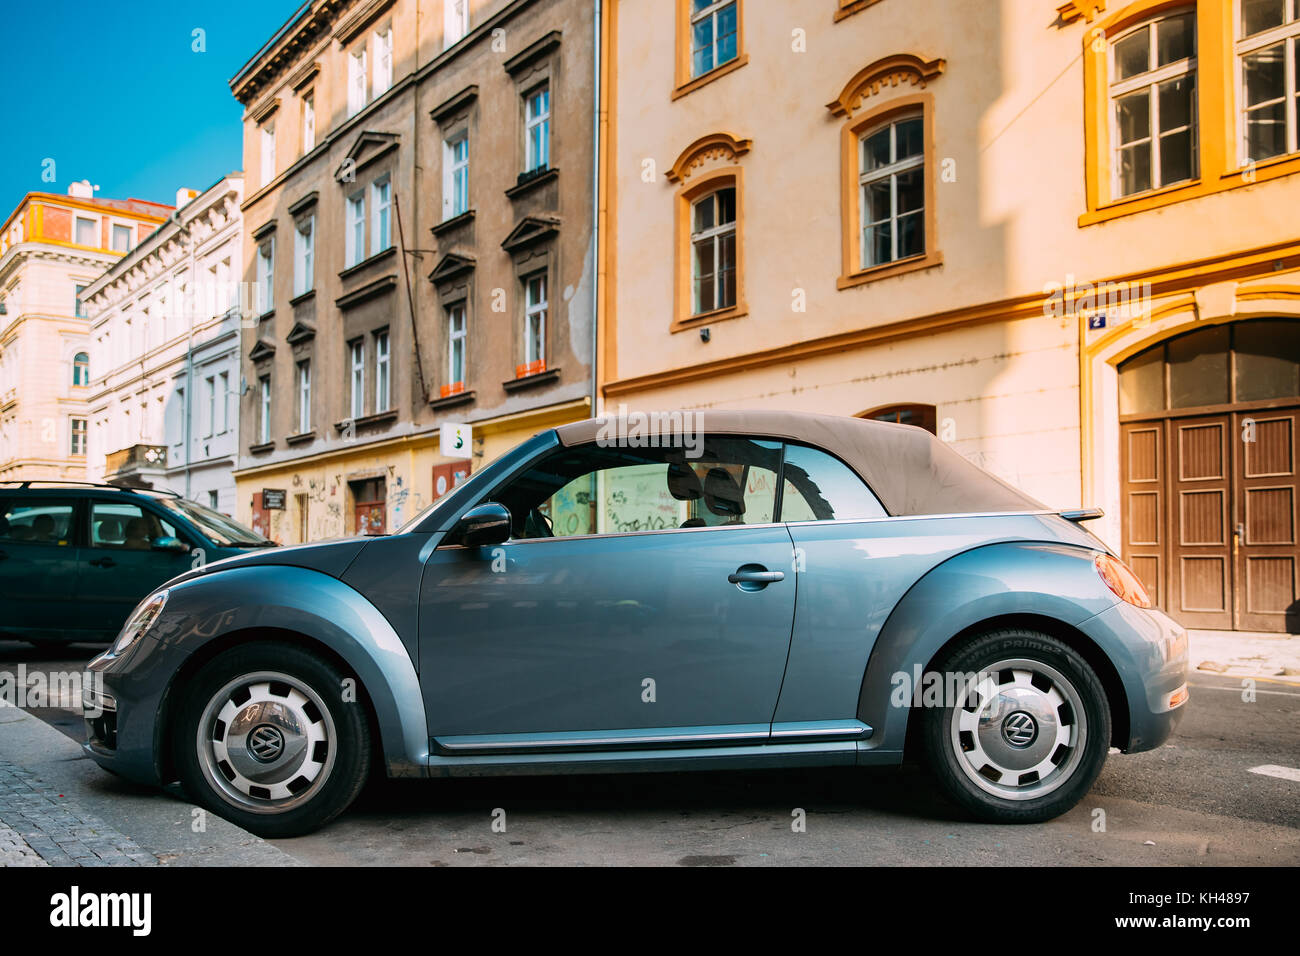 Prague, Czech Republic - September 23, 2017: Side View Of Blue Volkswagen New Beetle Cabriolet Car Parked In Street. Stock Photo